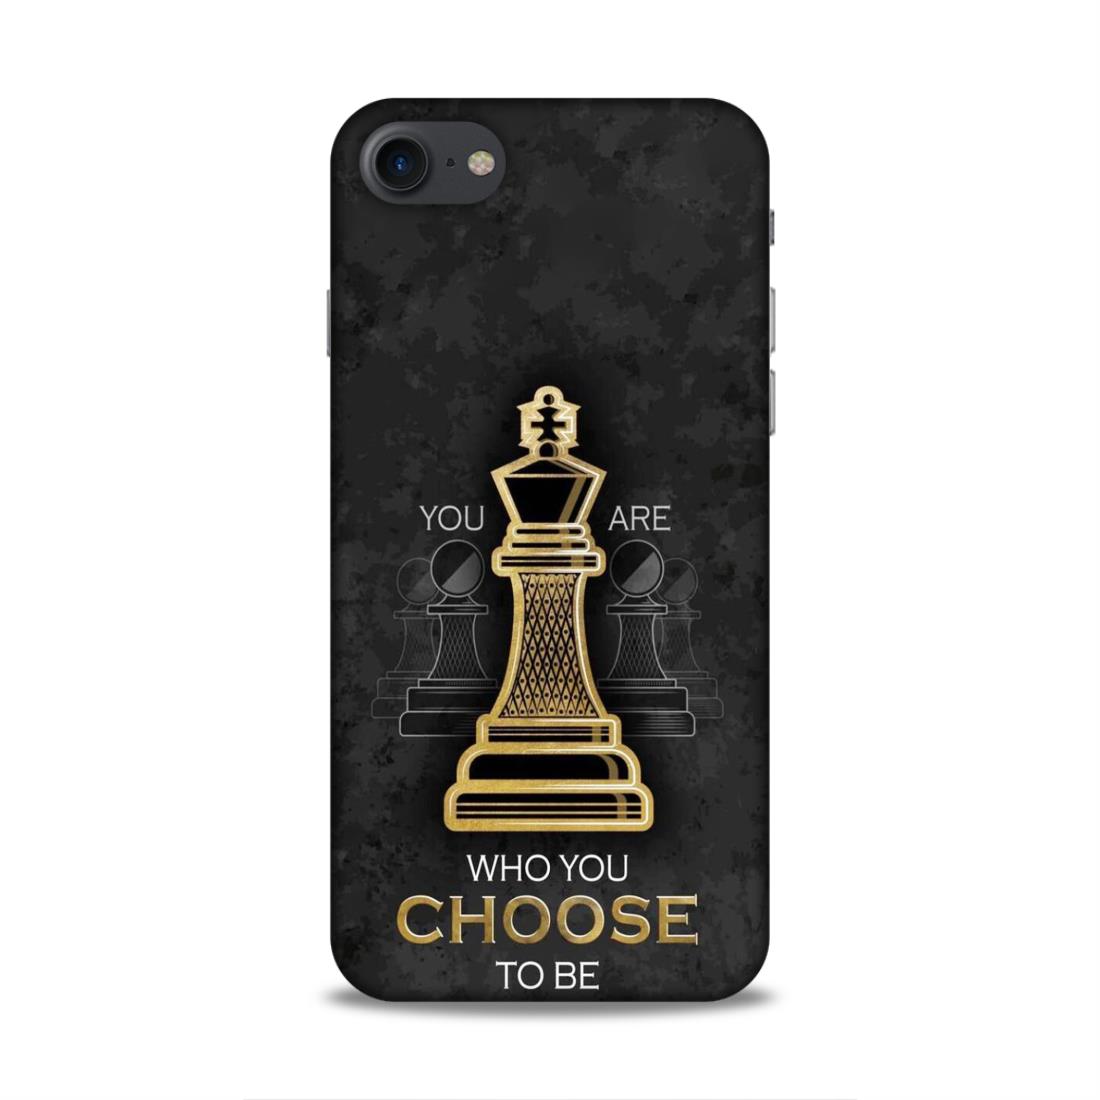 Who You Choose to Be Hard Back Case For Apple iPhone 7 / 8 / SE 2020